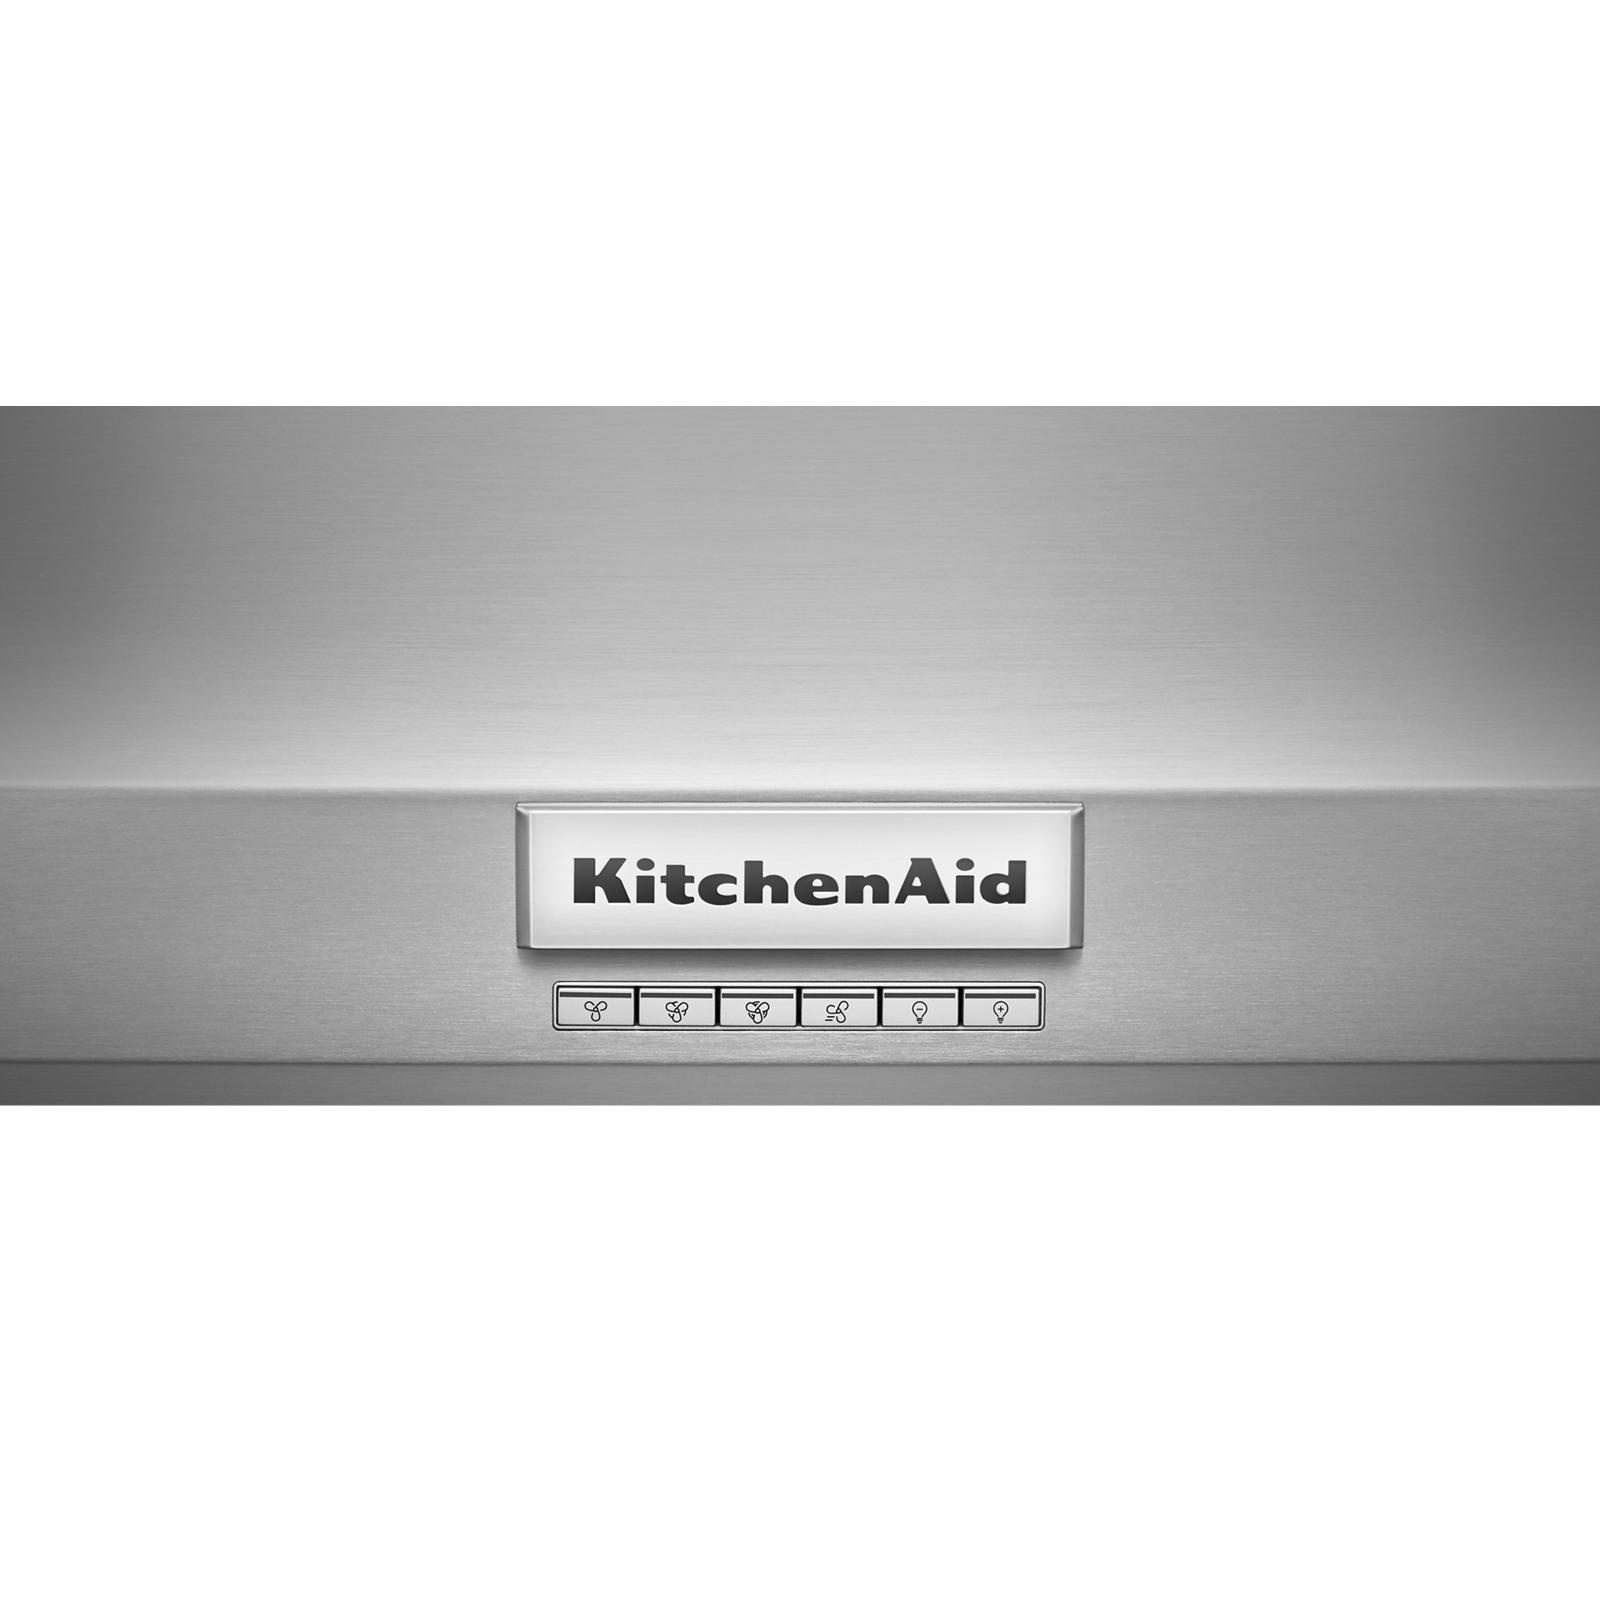 KitchenAid - 48 Inch 585 or 1170 CFM Wall Mount and Chimney Range Vent in Stainless - KVWC958KSS